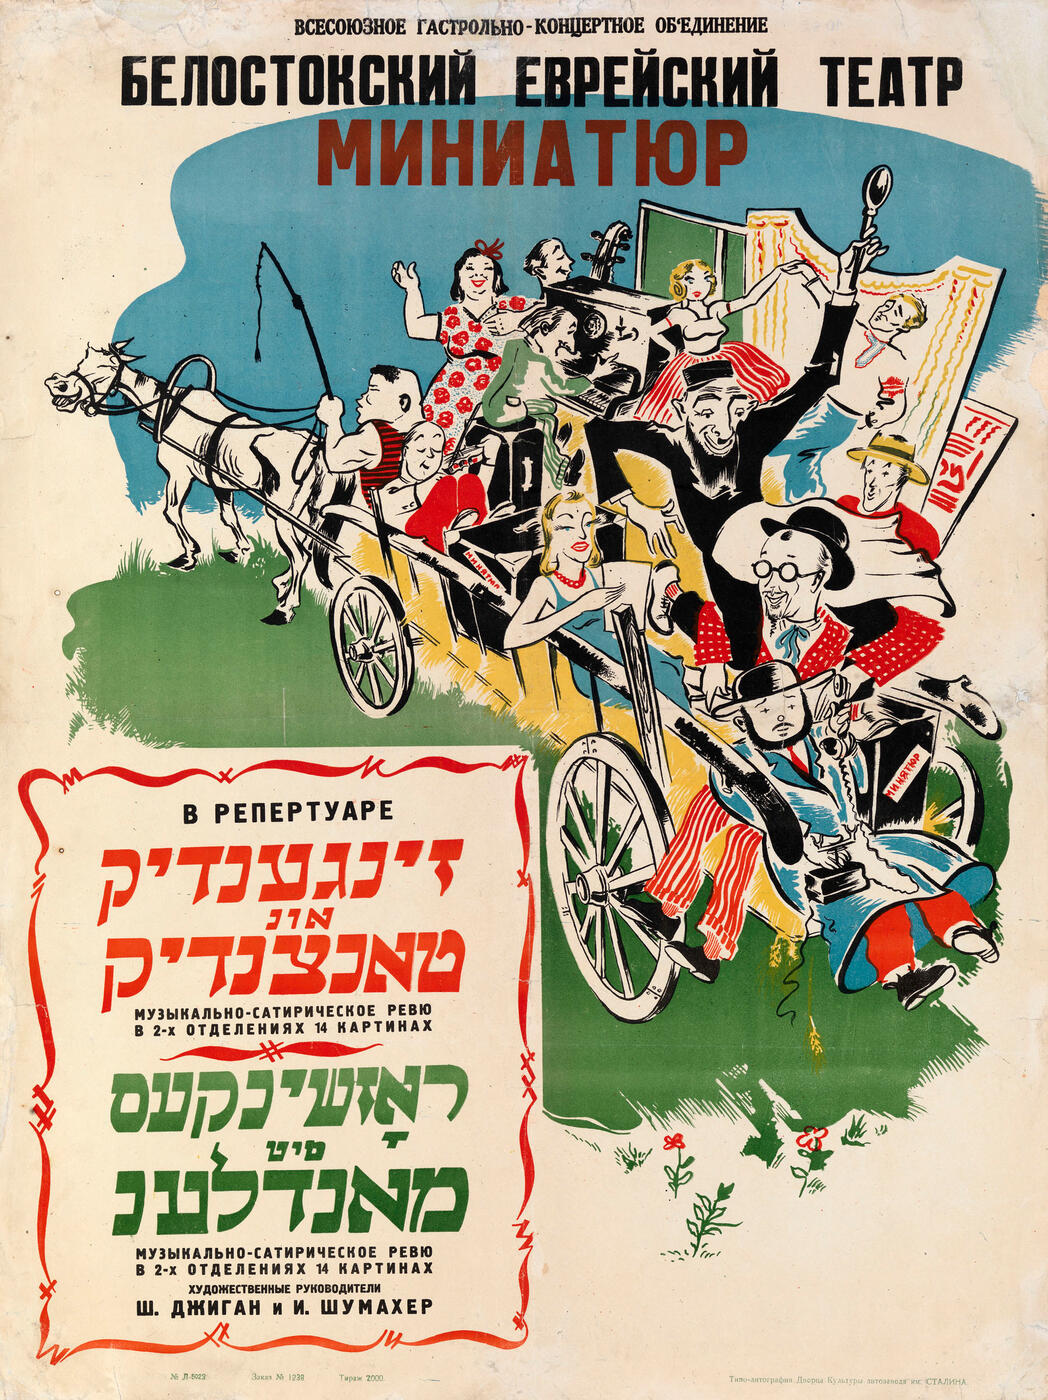 Poster for the “Singing and Dancing” Performance, Belostok Jewish Theatre of Miniatures